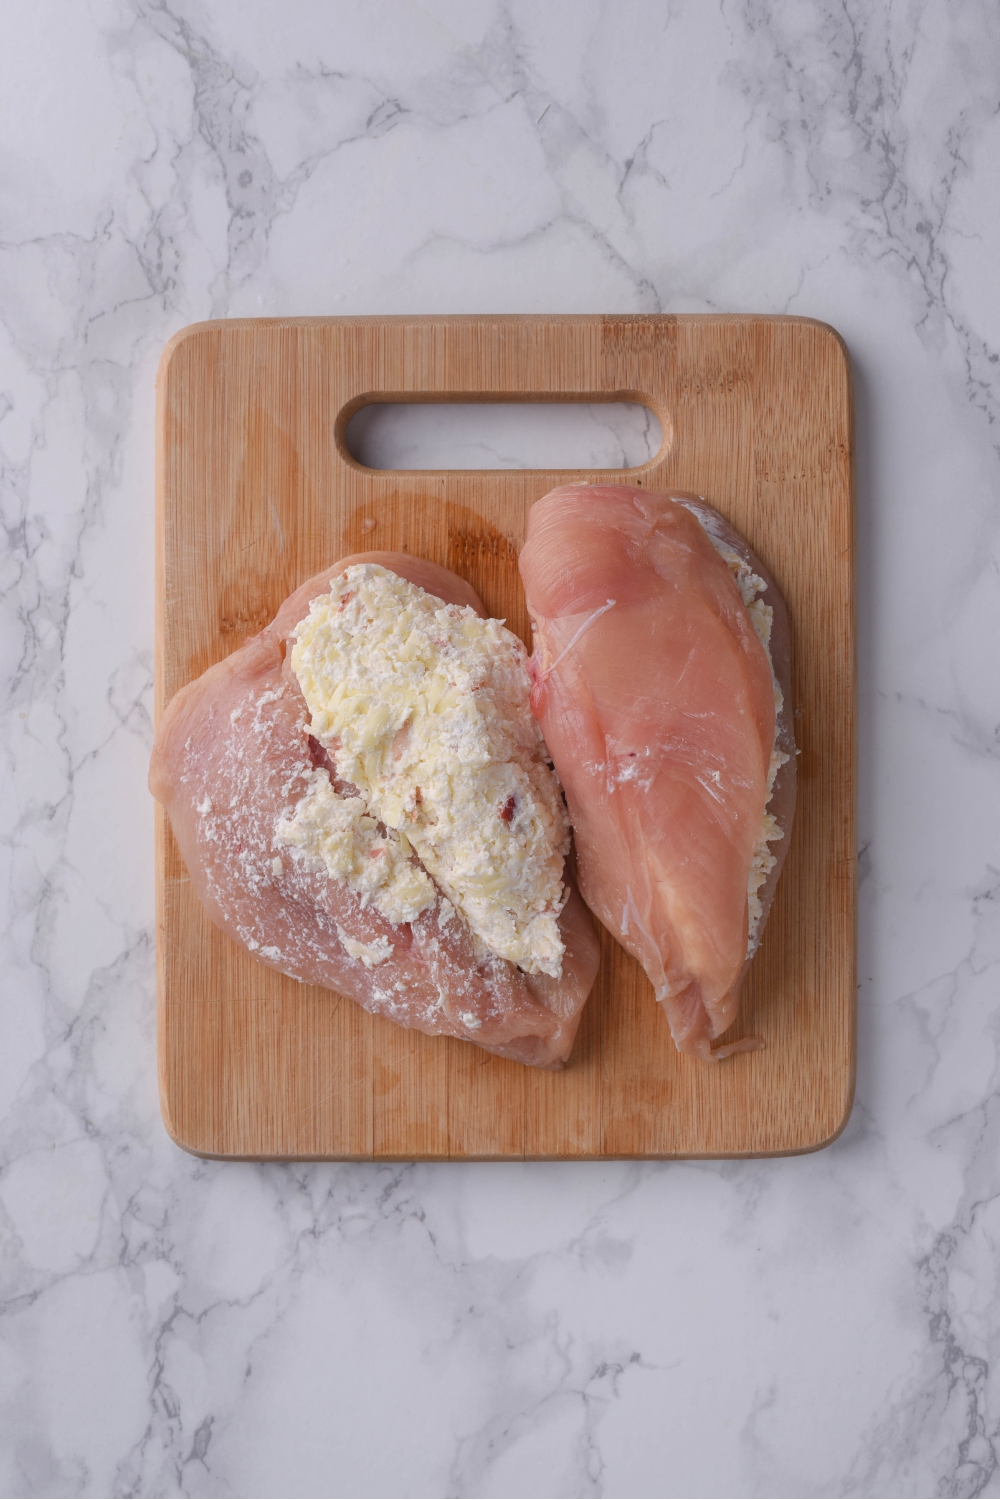 Two raw chicken breasts butterflied on a wood cutting board. Both are stuffed with a cream cheese mixture and one is open.